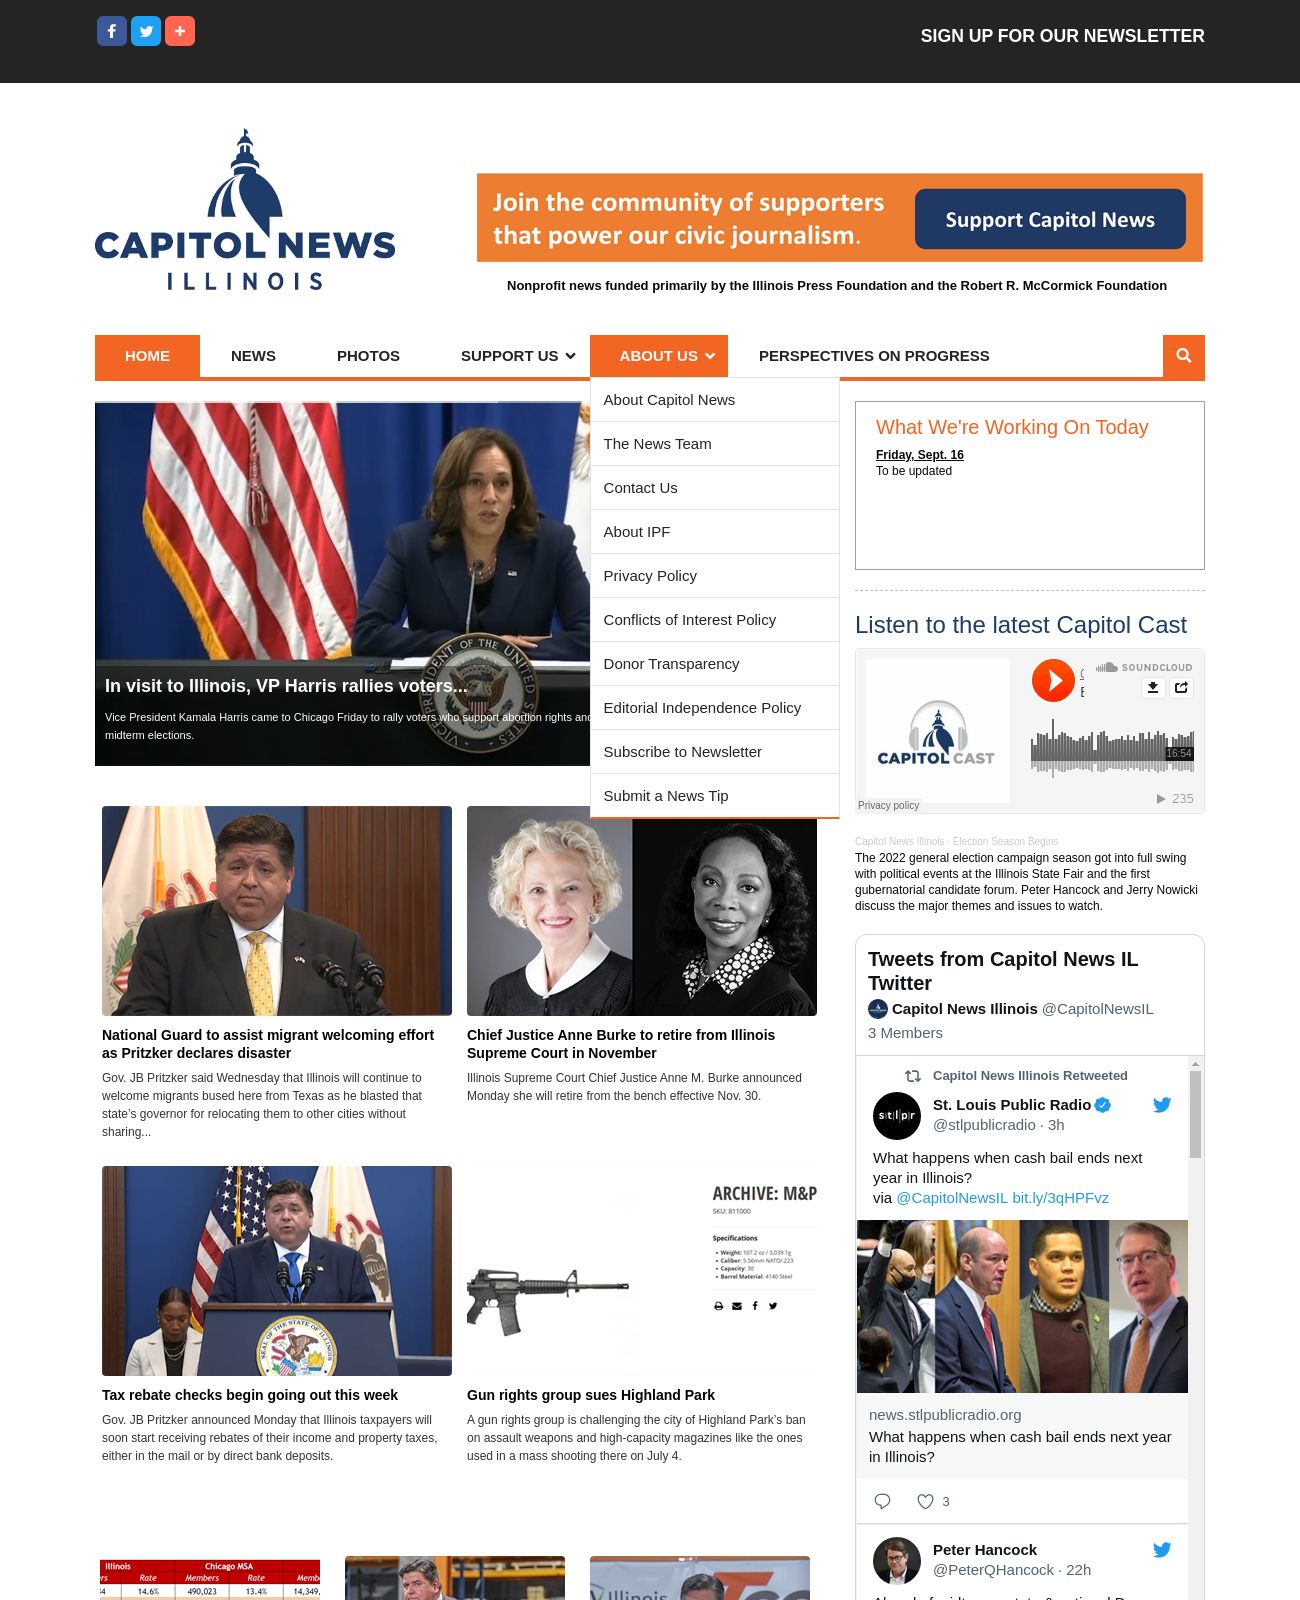 Capitol News Illinois at 2022-09-17 17:56:02-05:00 local time